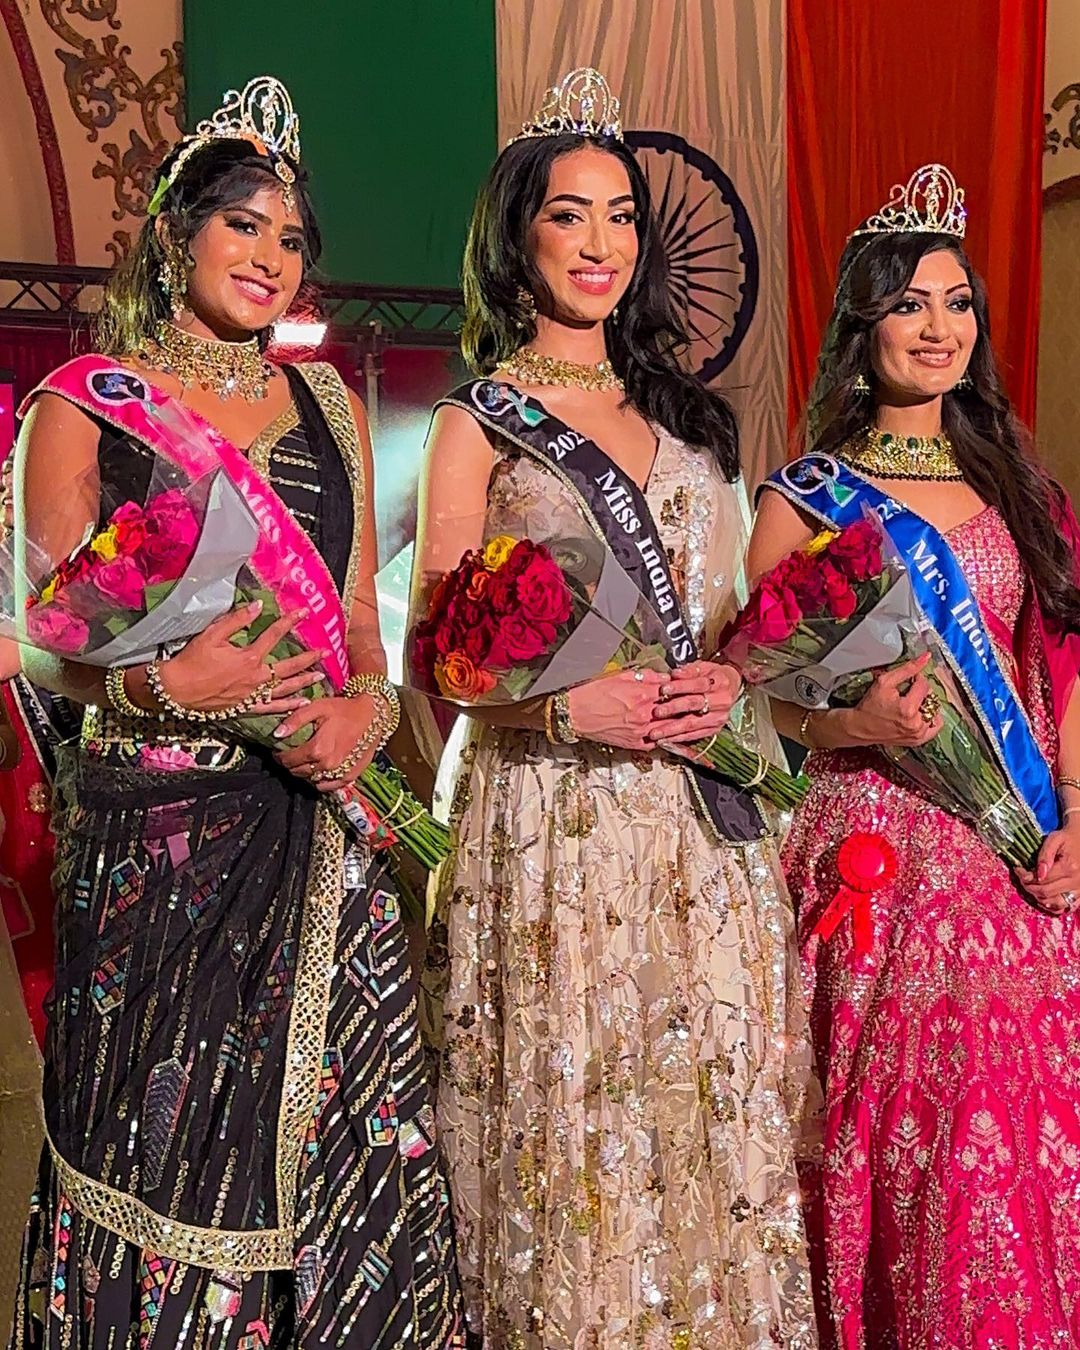 I am so humbled and grateful to say that I am the new MISS INDIA USA 2023!   This could not have been possible without the support of my loving parents and family, Michigan pageant directors @chrysaliscouturem (1)